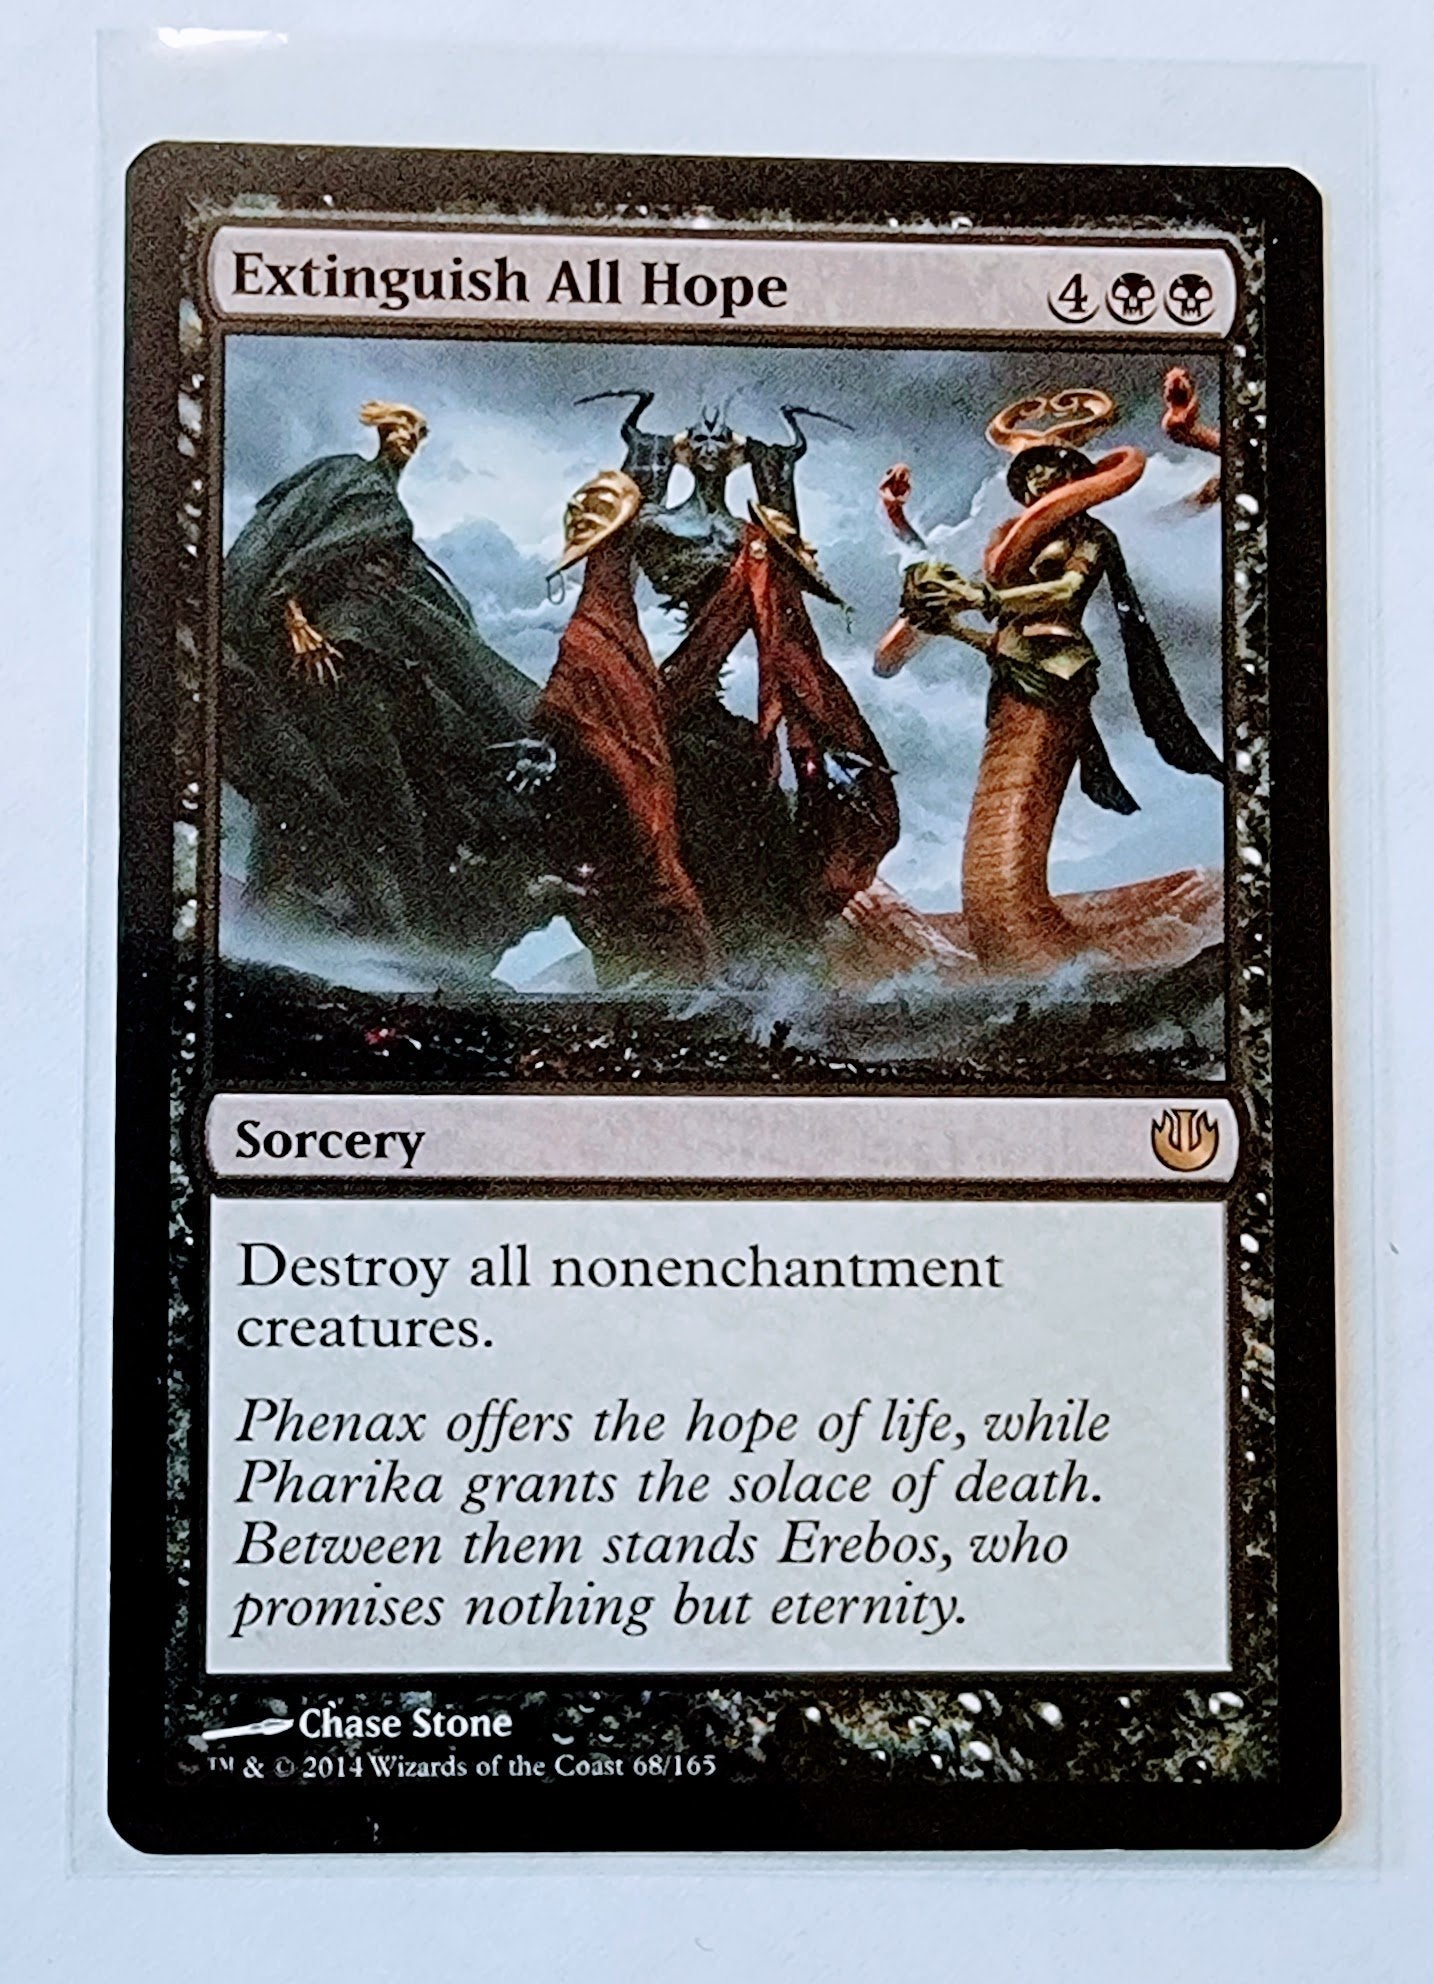 2014 Wizards of the Coast Magic: The Gathering - Extinguish All Hope Booster Card MCSC1 simple Xclusive Collectibles   